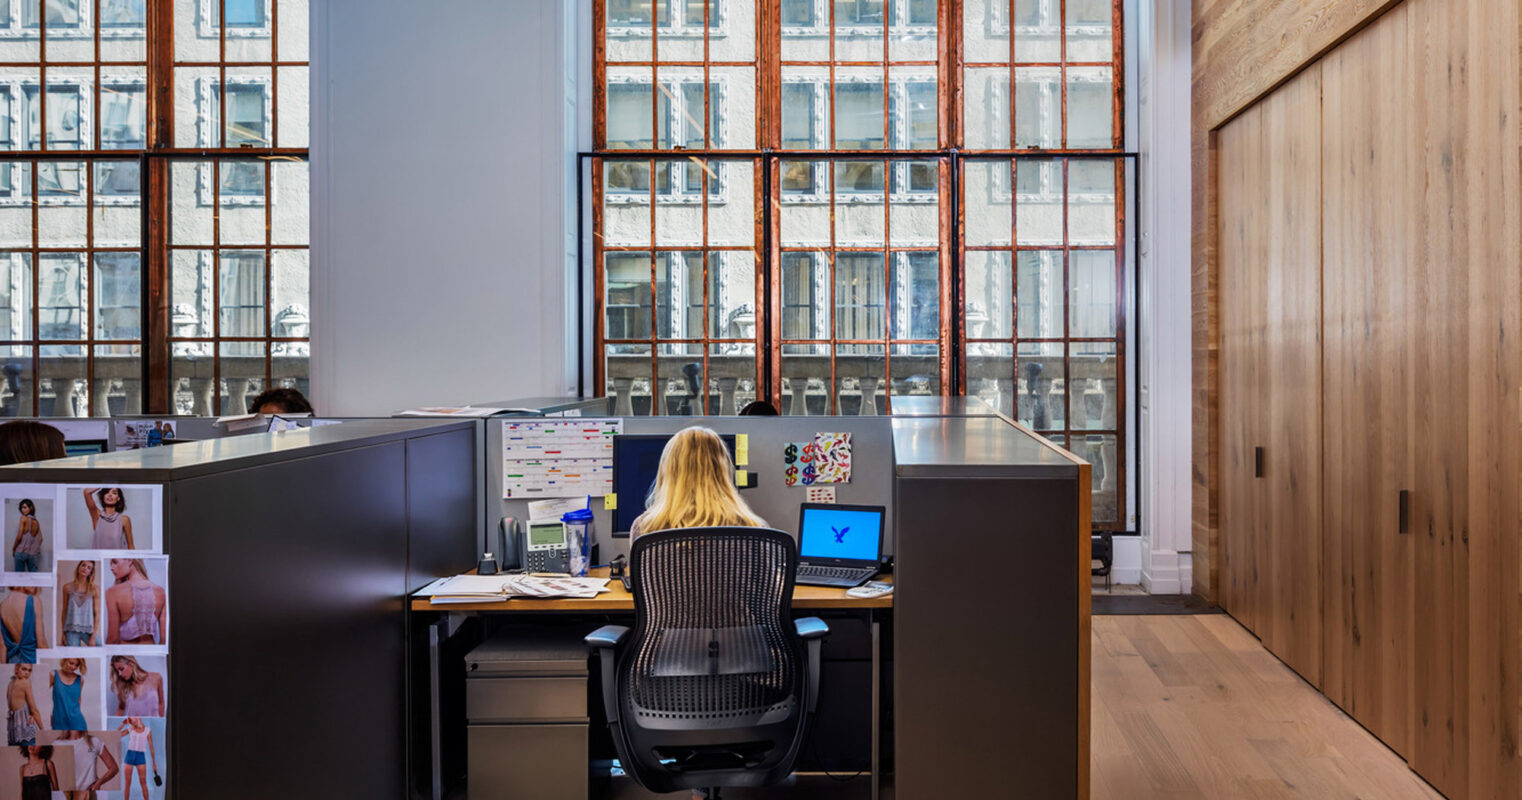 Open-plan office space featuring a workstation with a seated employee focusing on a laptop. Exposed brick façade with large windows allows natural light, complementing the warm tones of the wooden wall cladding and flooring. A personal mood board adds a touch of individuality to the professional setting.